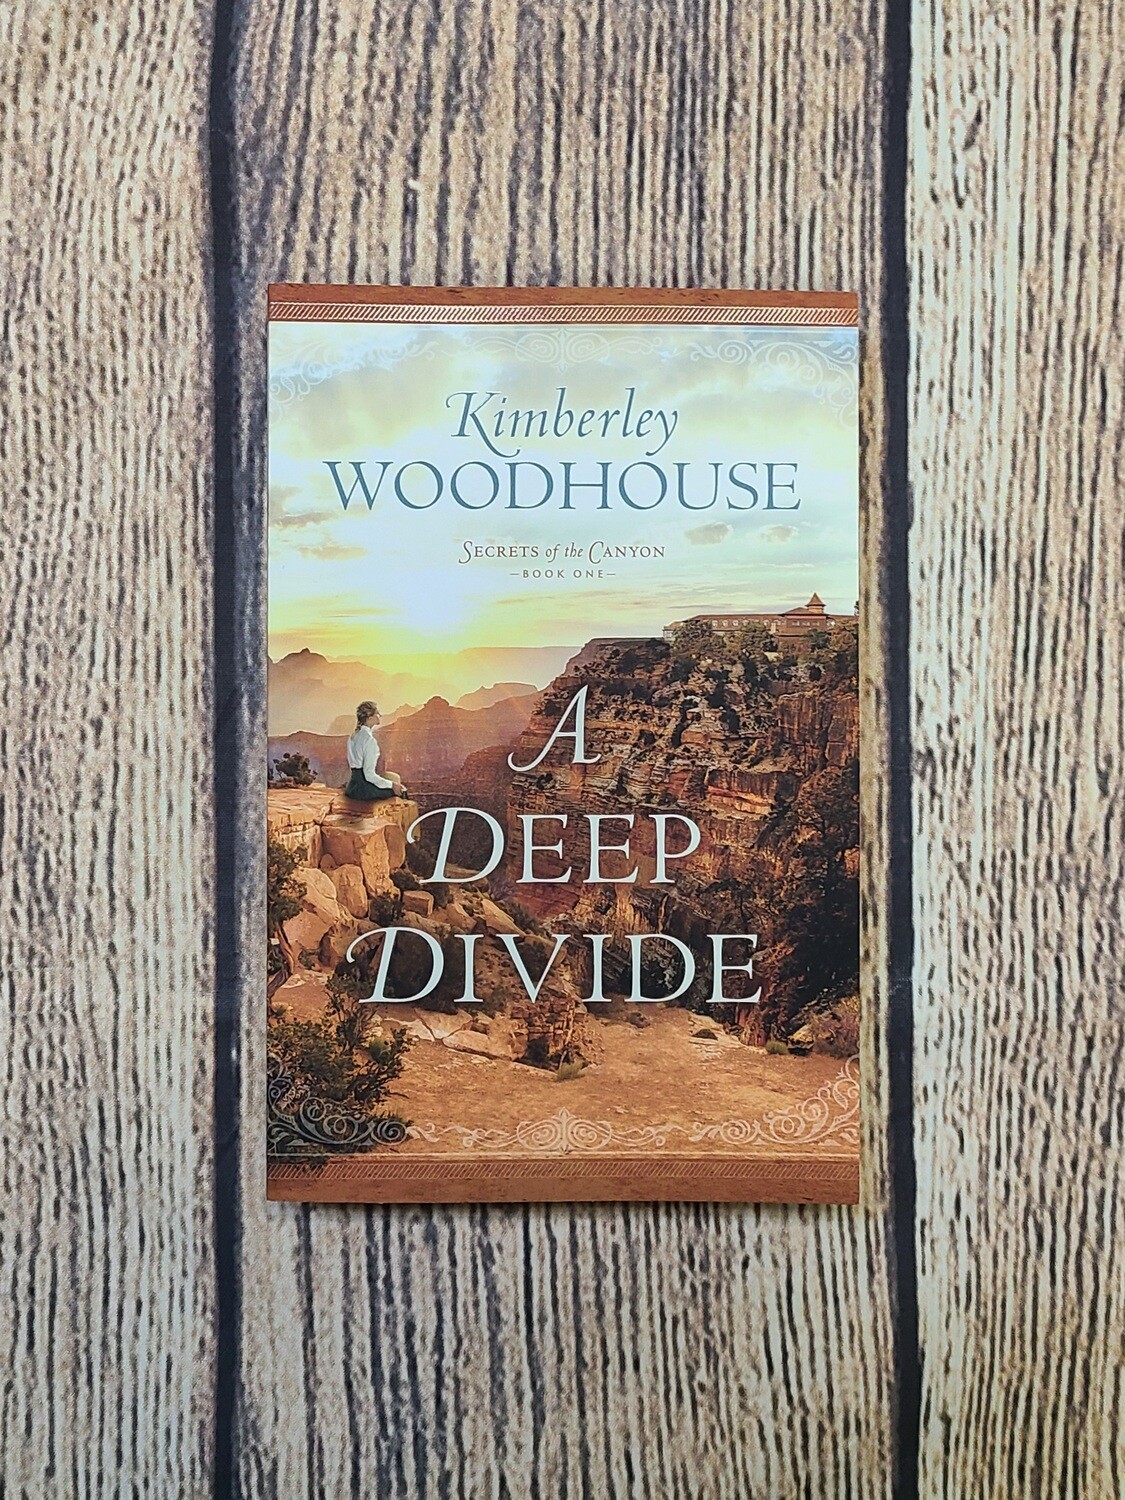 A Deep Divide by Kimberley Woodhouse - Paperback - New